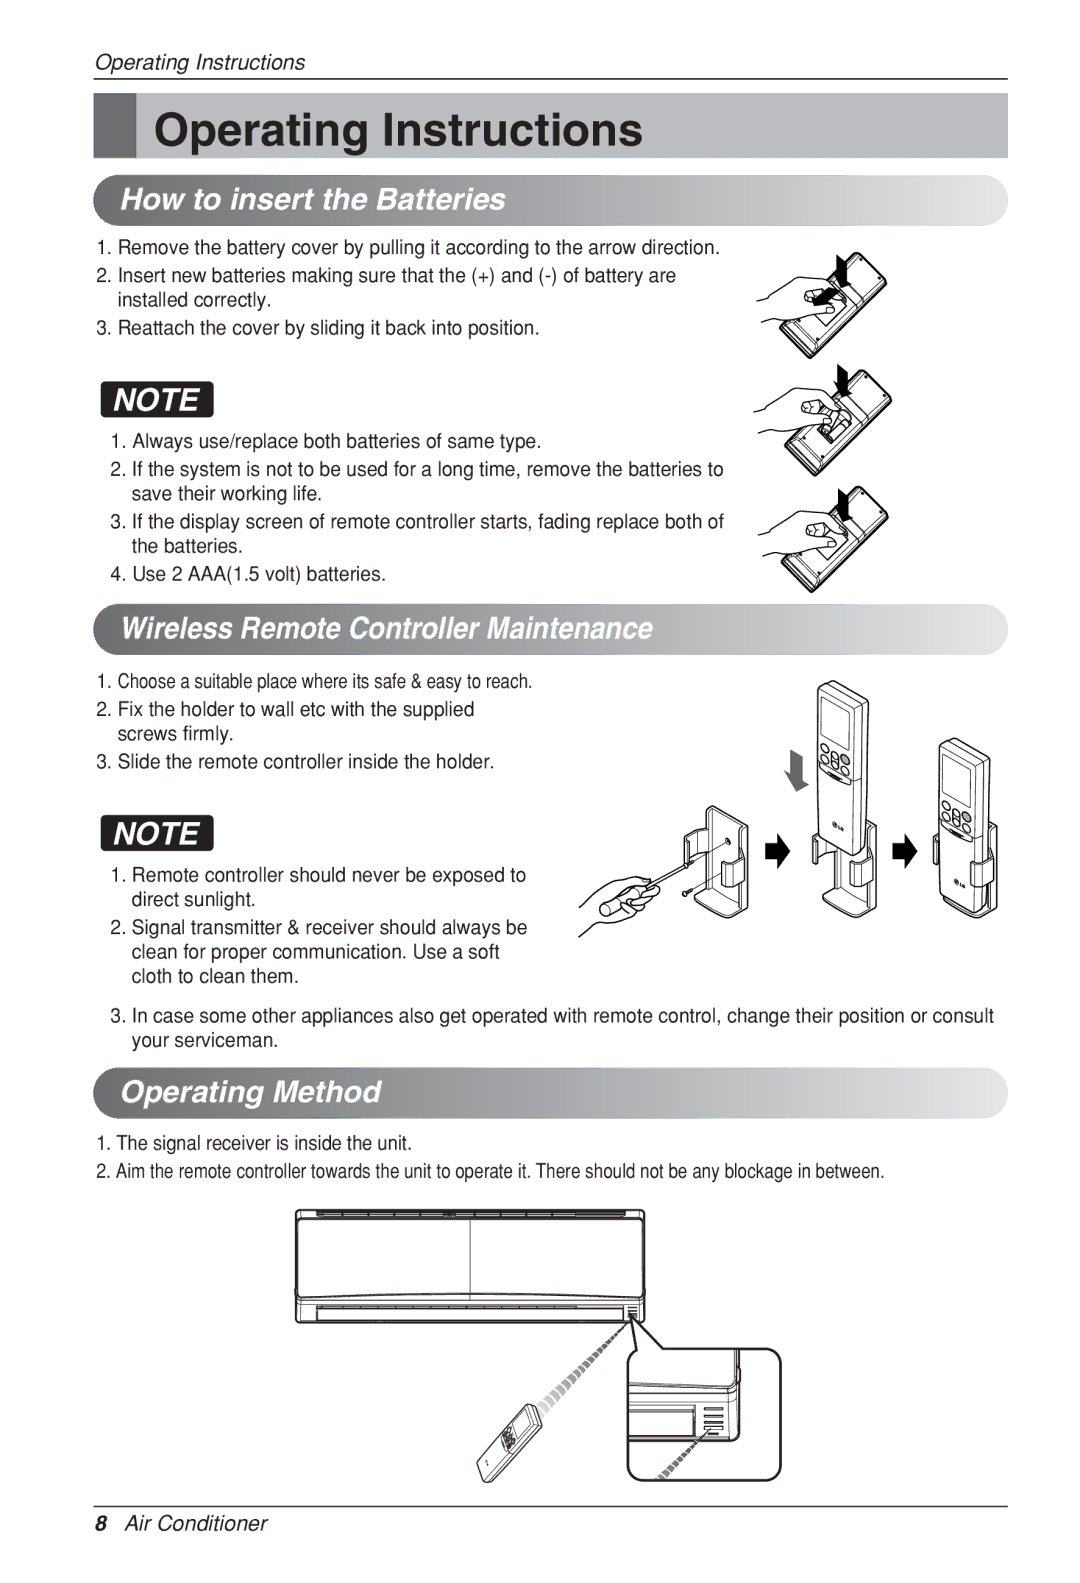 LG Electronics HV2, LSN Operating Instructions, How to insert the Batteries, Wireless Remote Controller Maintenance 